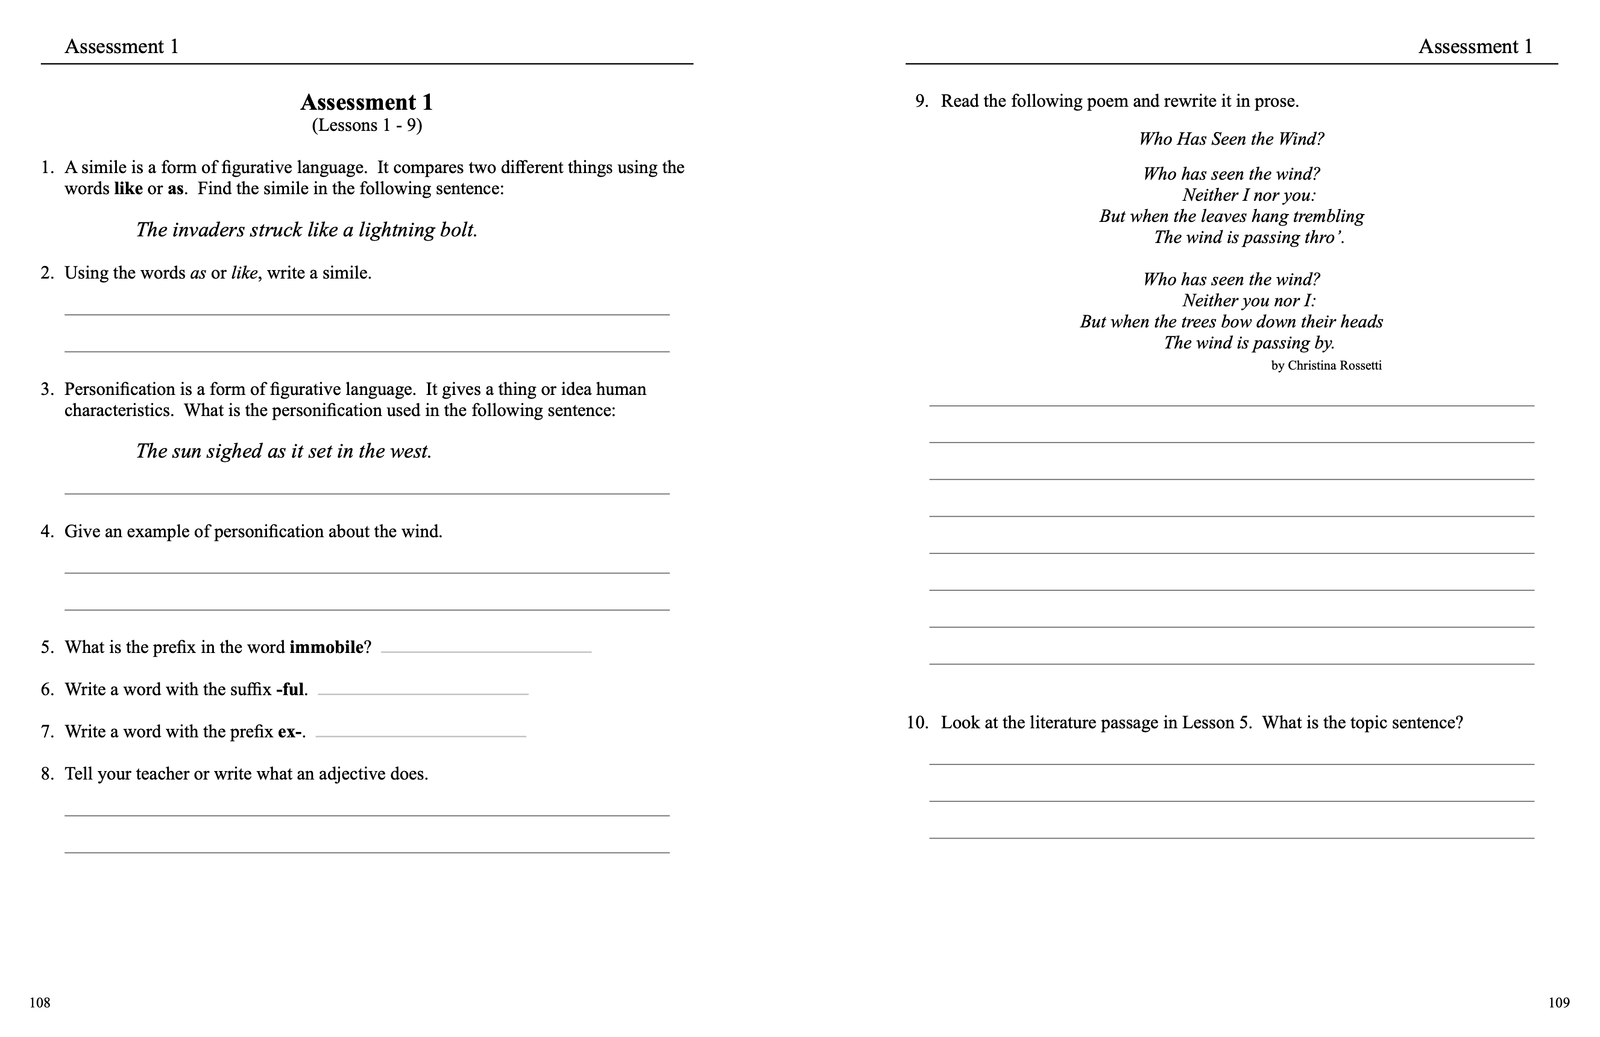 Learning language arts through literature the tan book student book assessment page sample